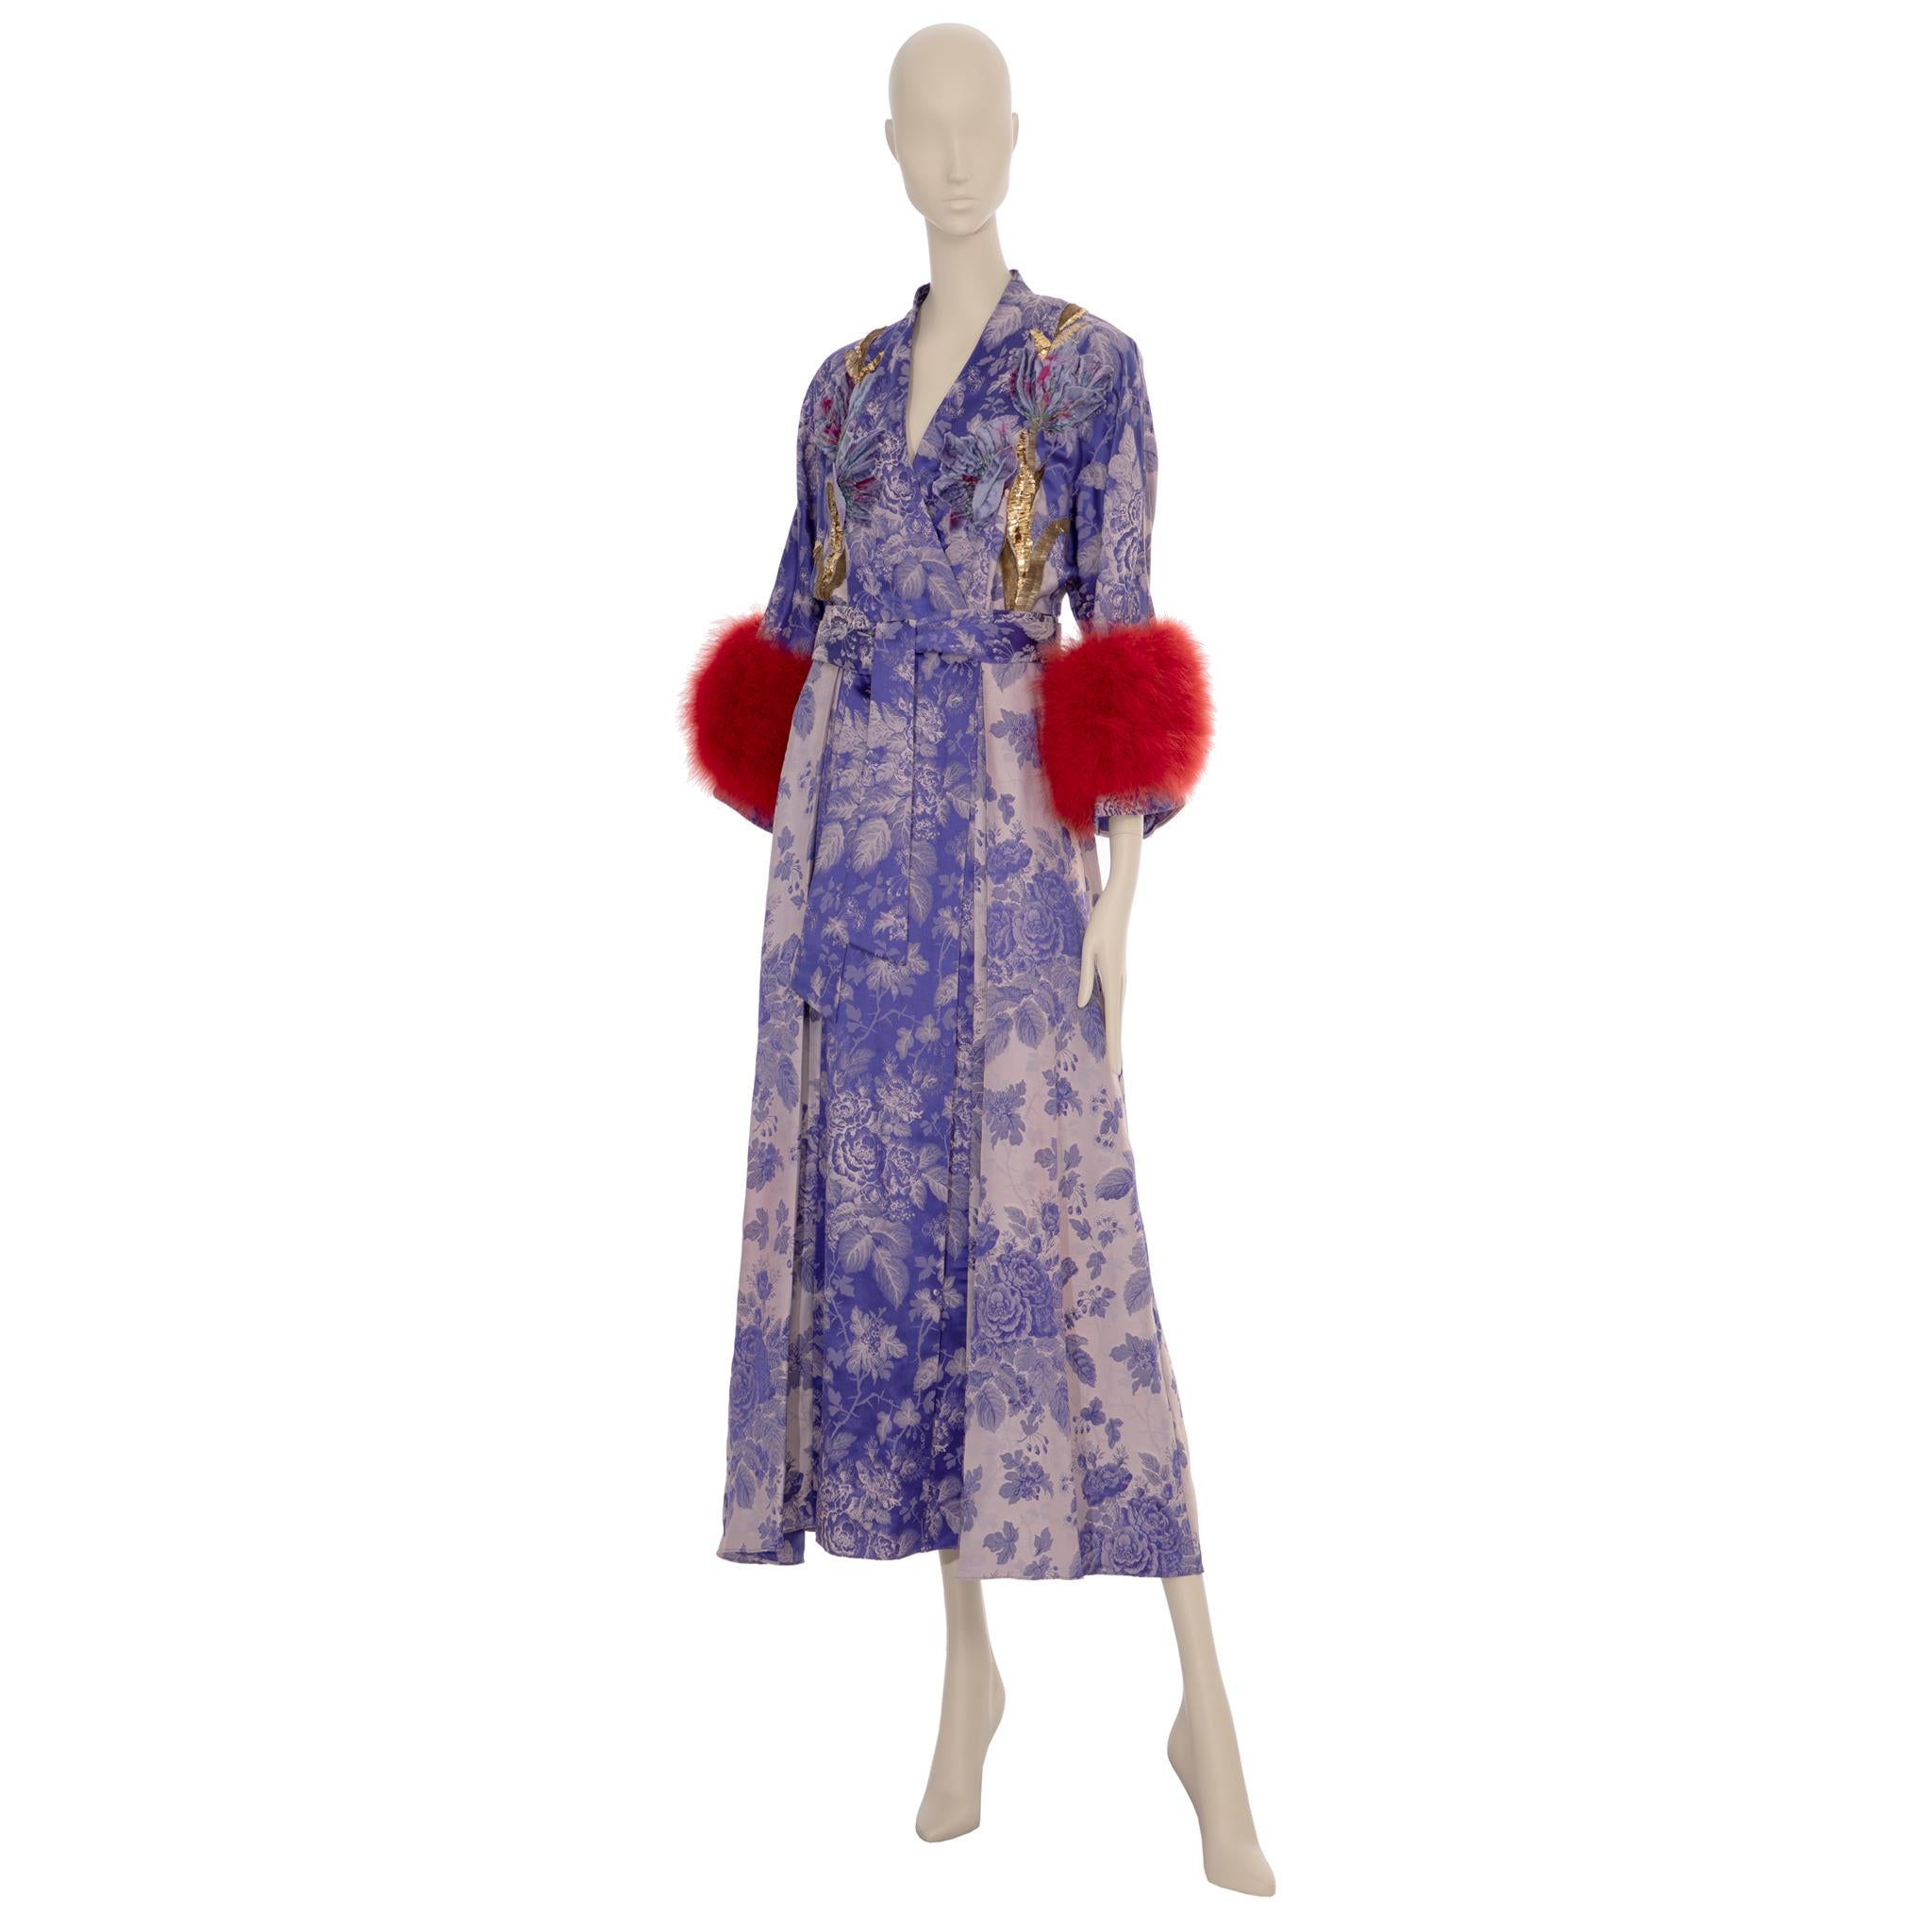 Gucci Floral Jacquard Wrap Dress With Ostrich Feathers 38 It For Sale 5